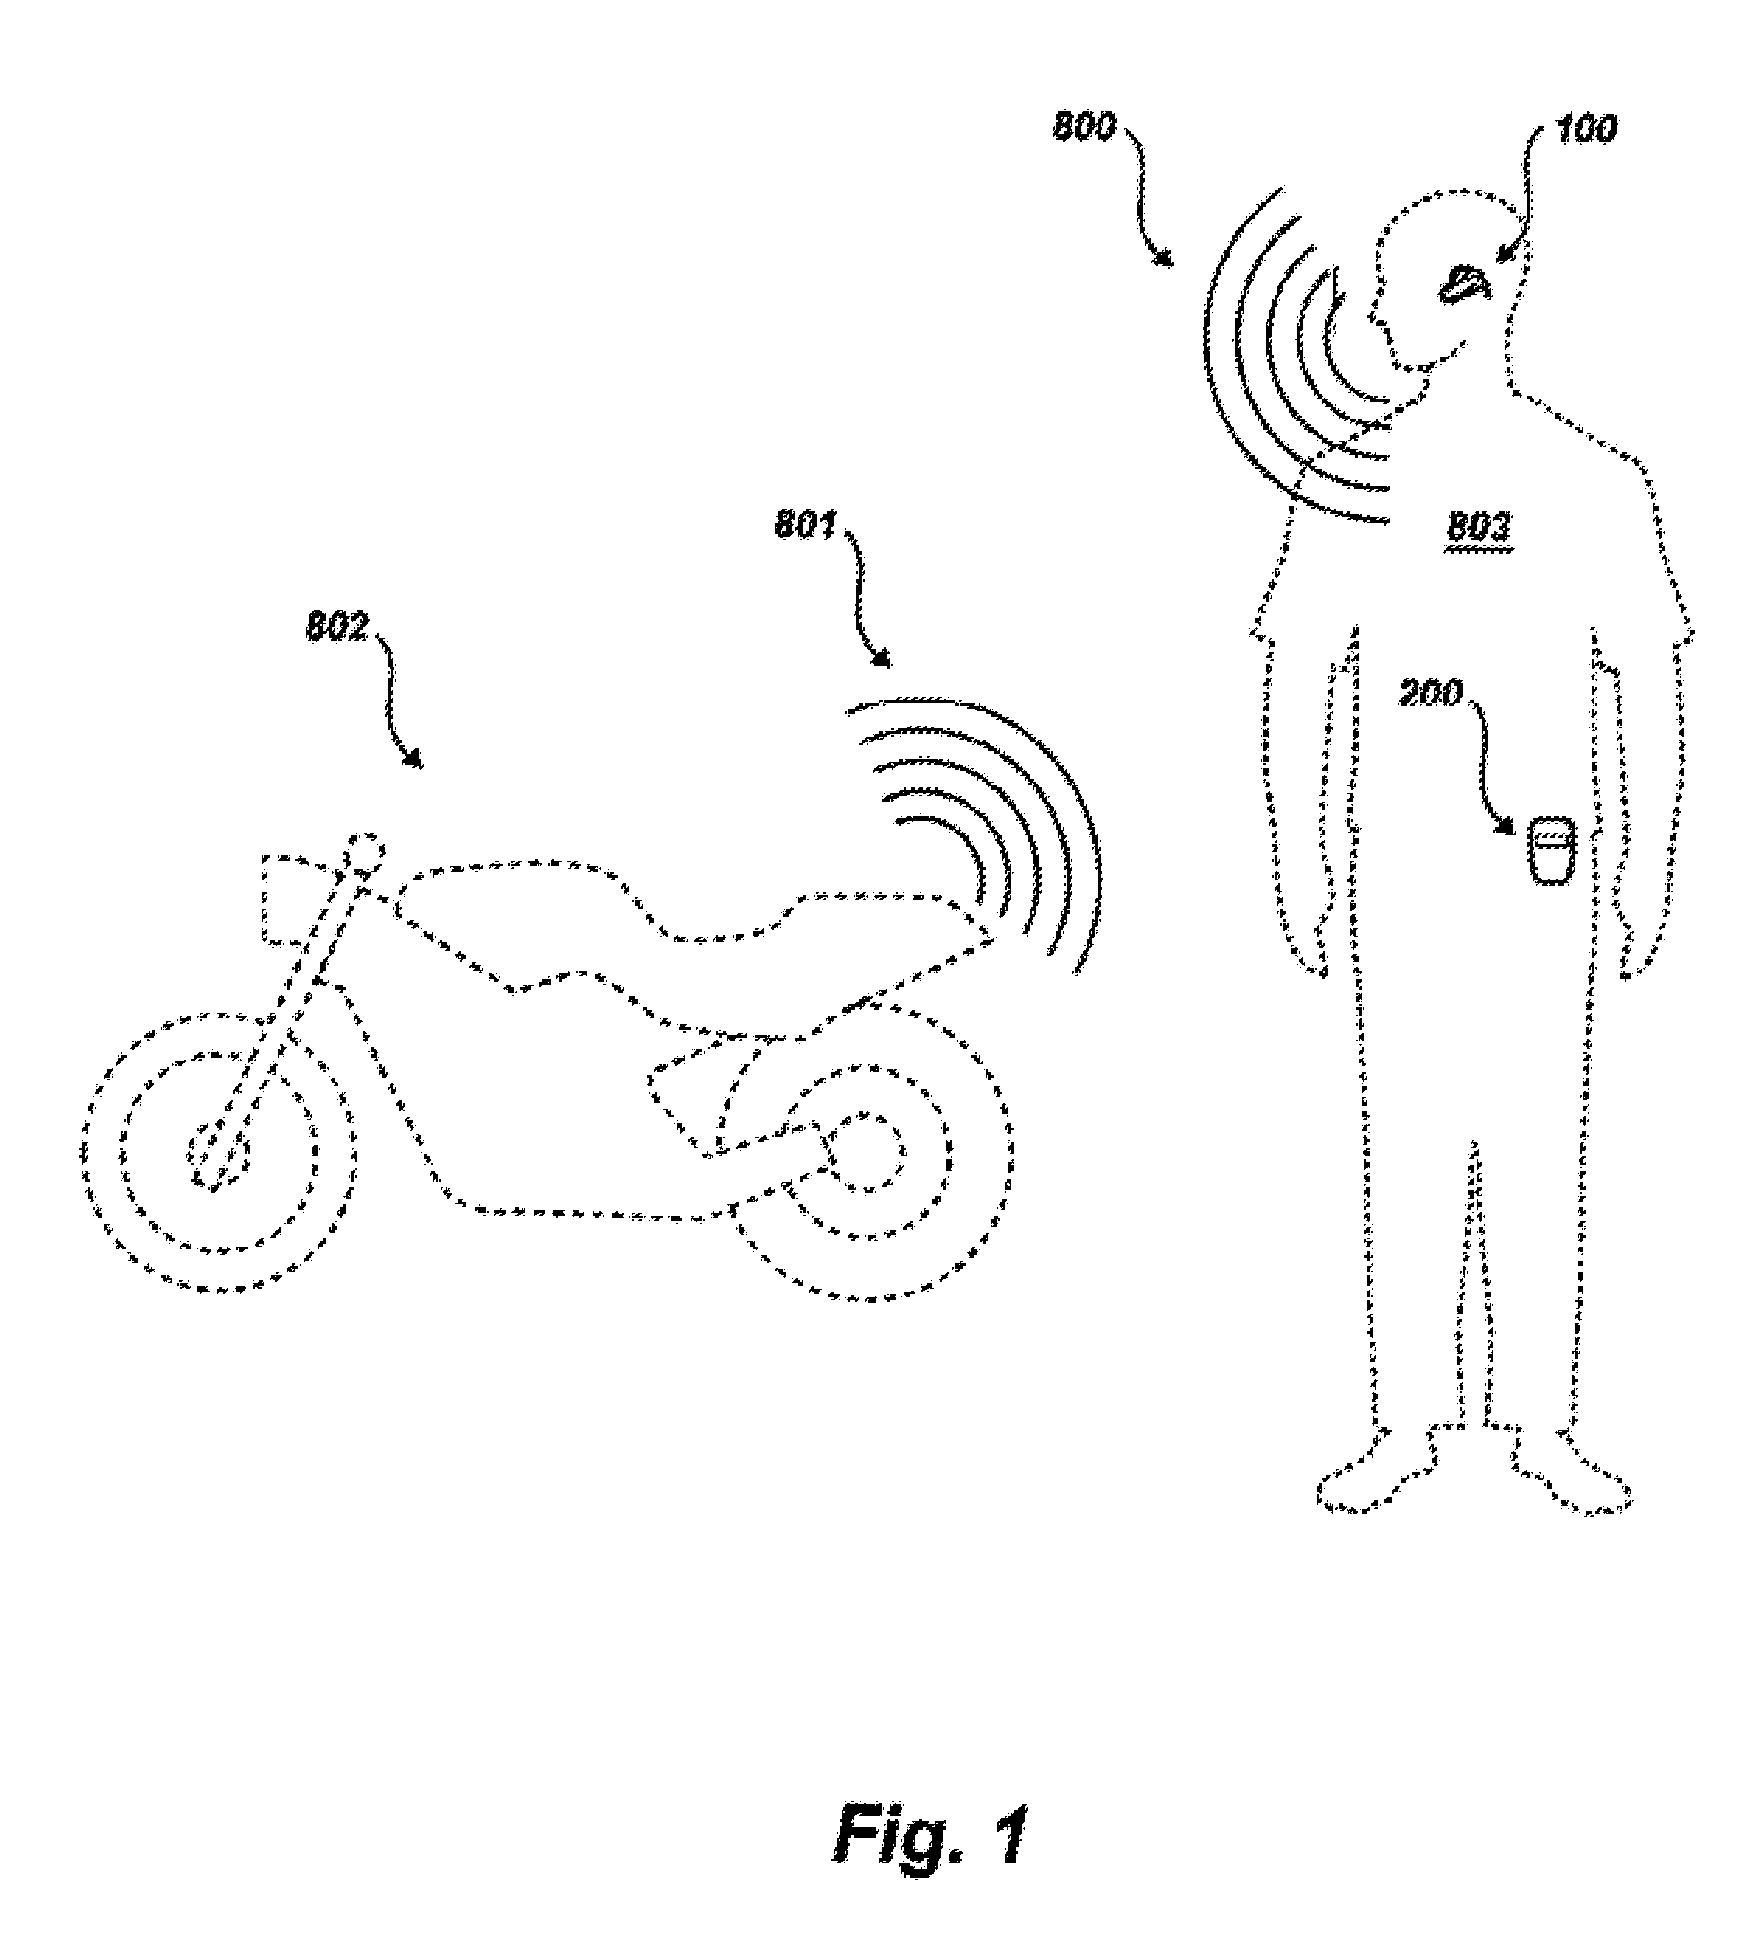 Noise reduction system and method suitable for hands free communication devices